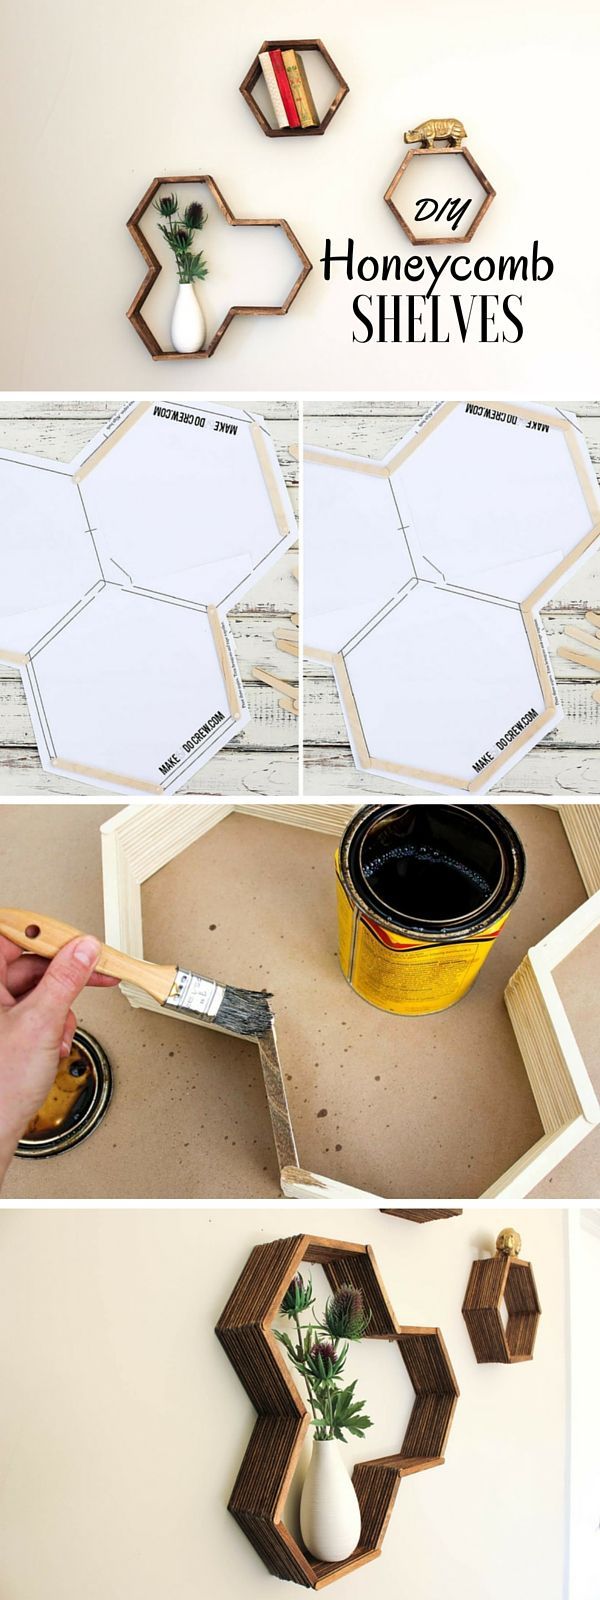 Check out the tutorial: #DIY Honeycomb Shelves @Industry Standard Design